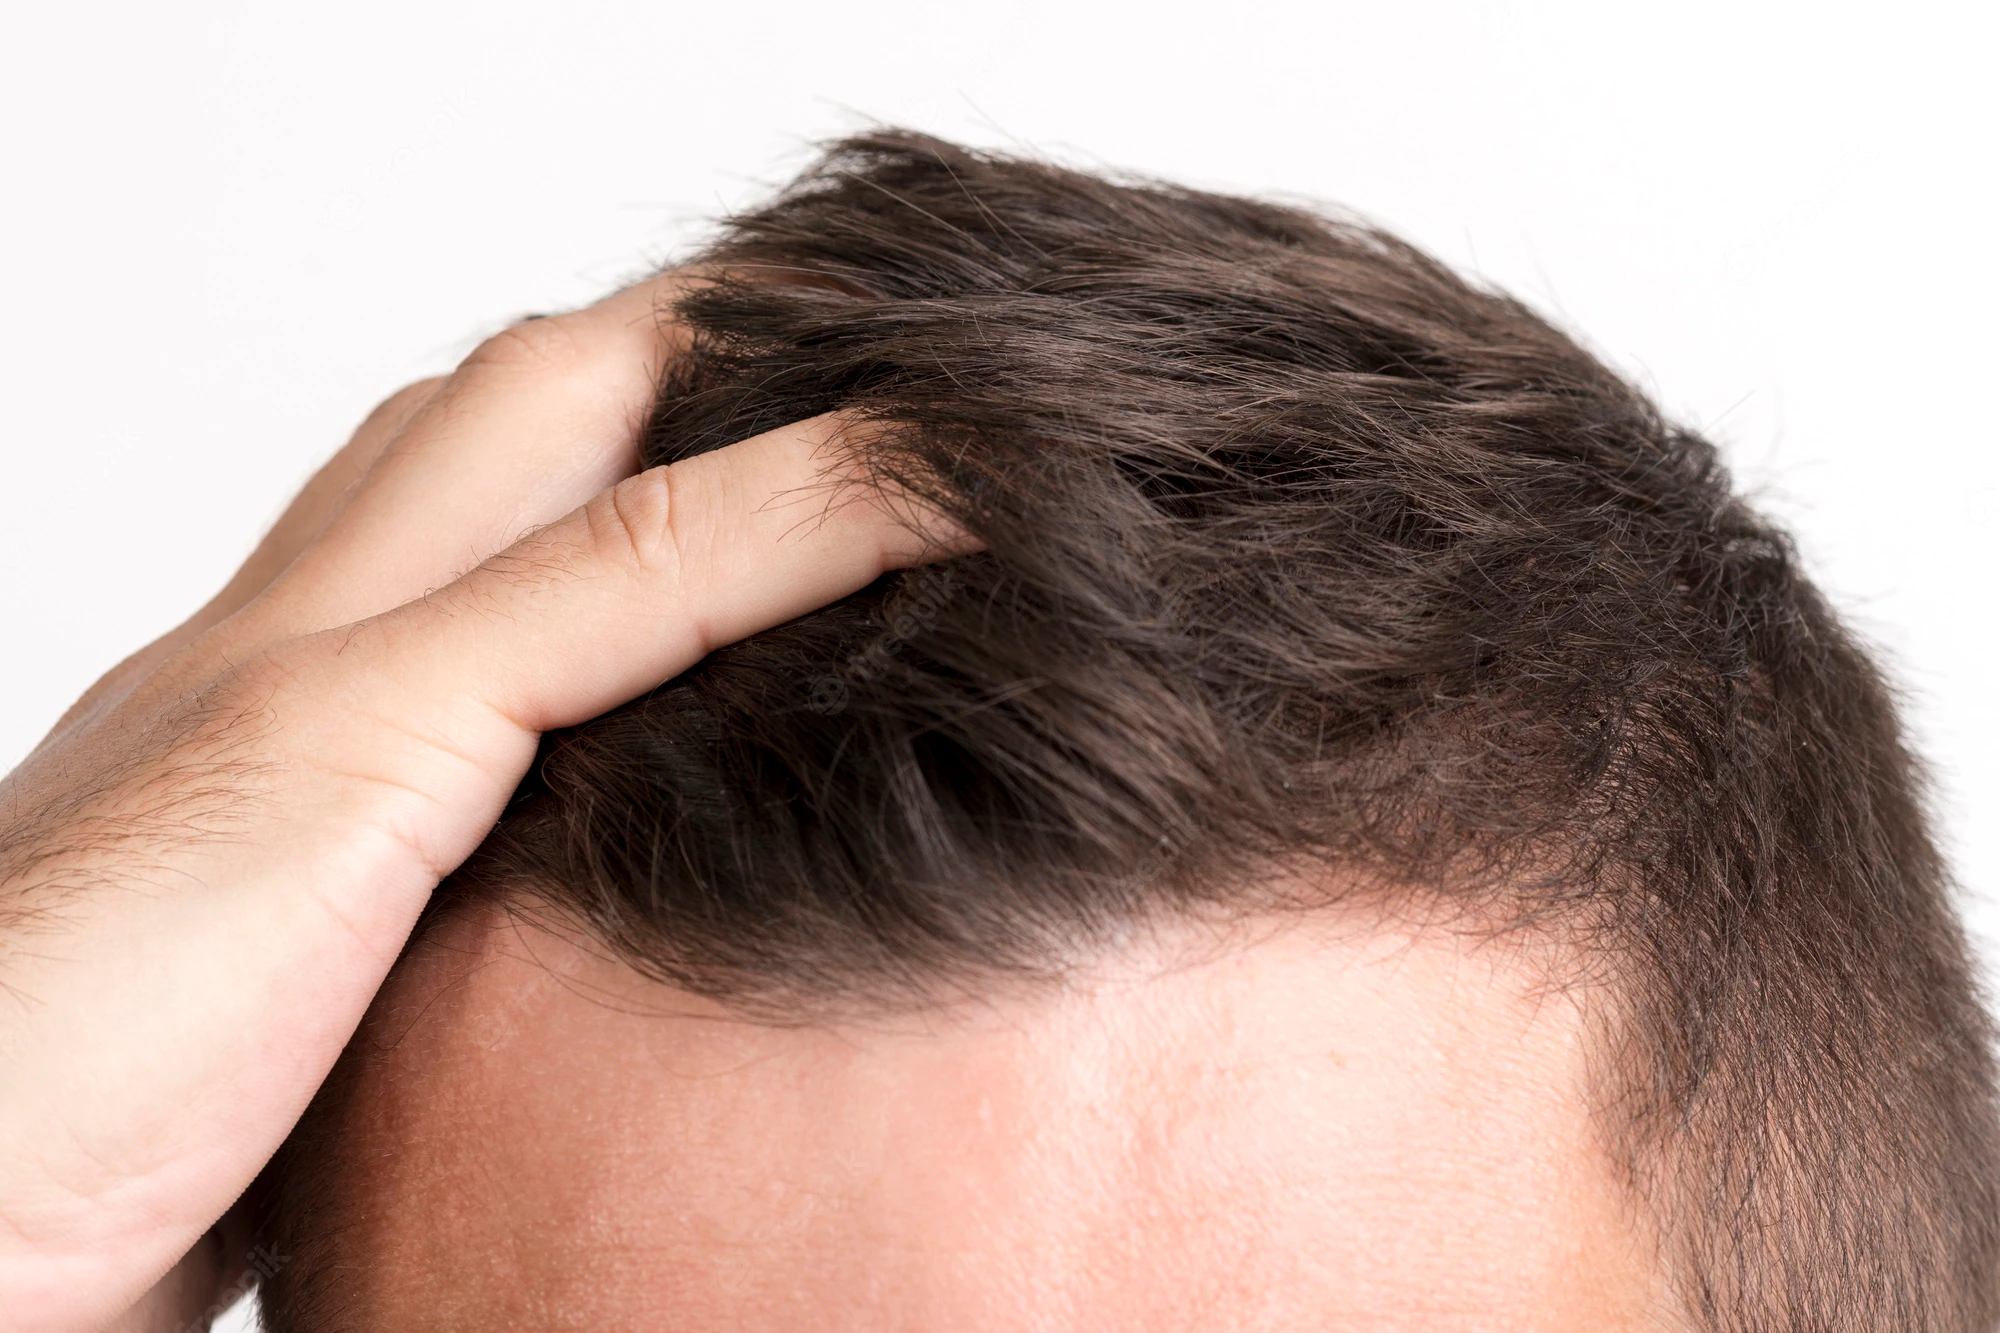 switching from finasteride to dutasteride for hair loss